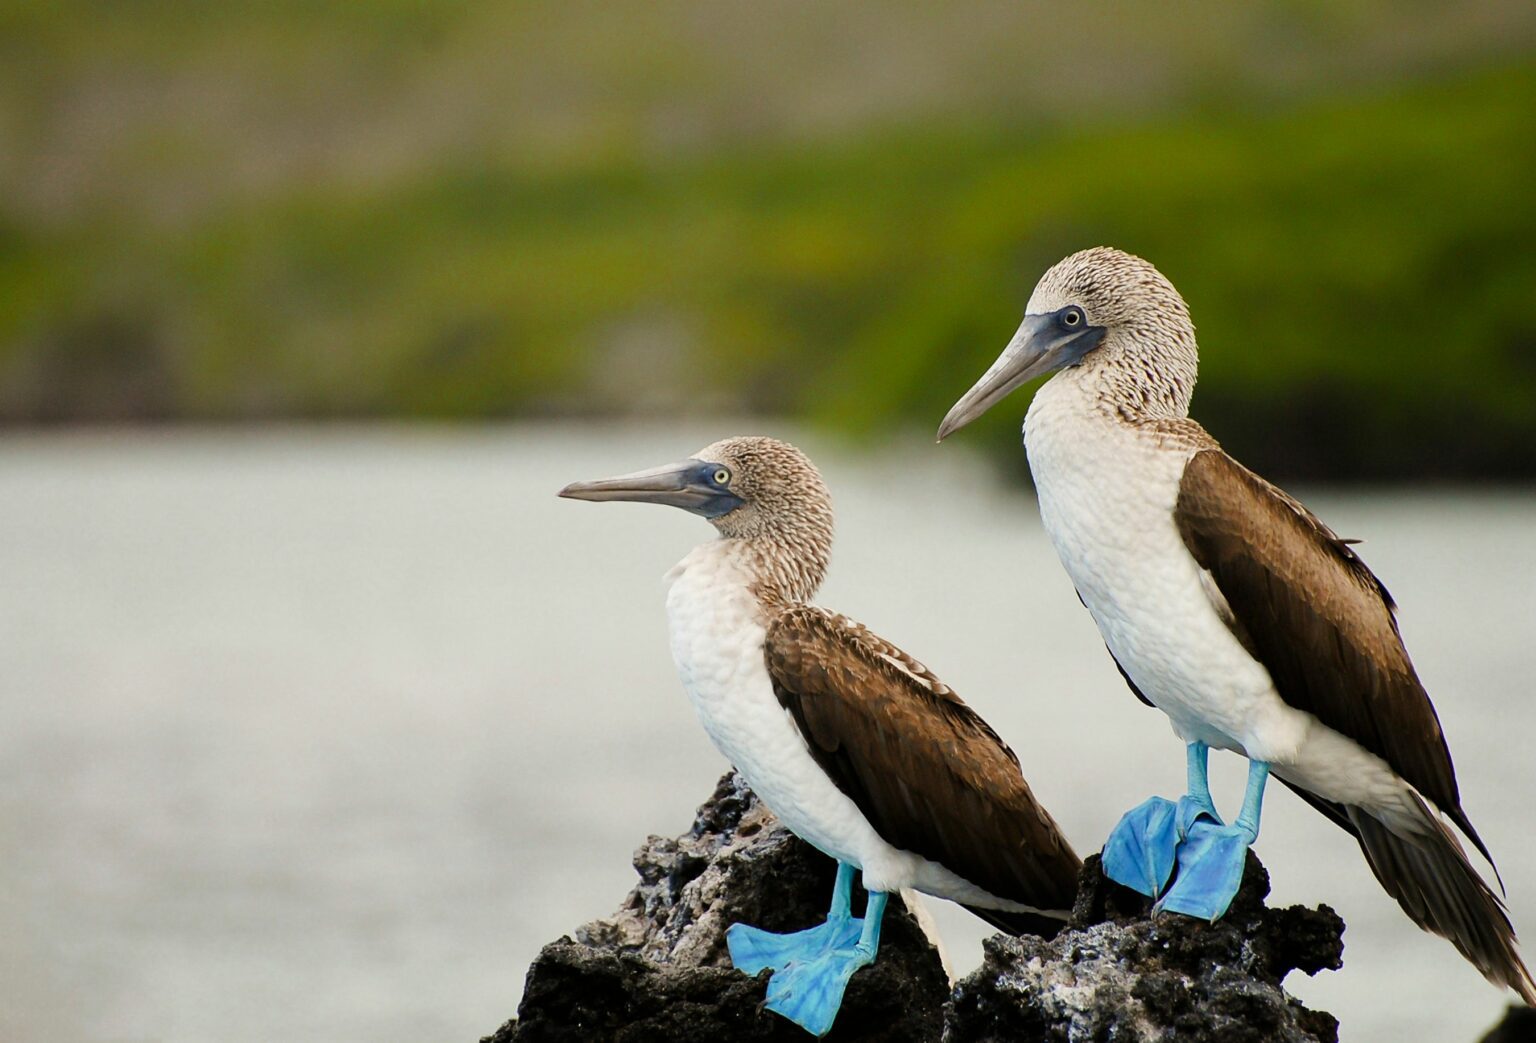 Two brown and white birds sitting on a rock.